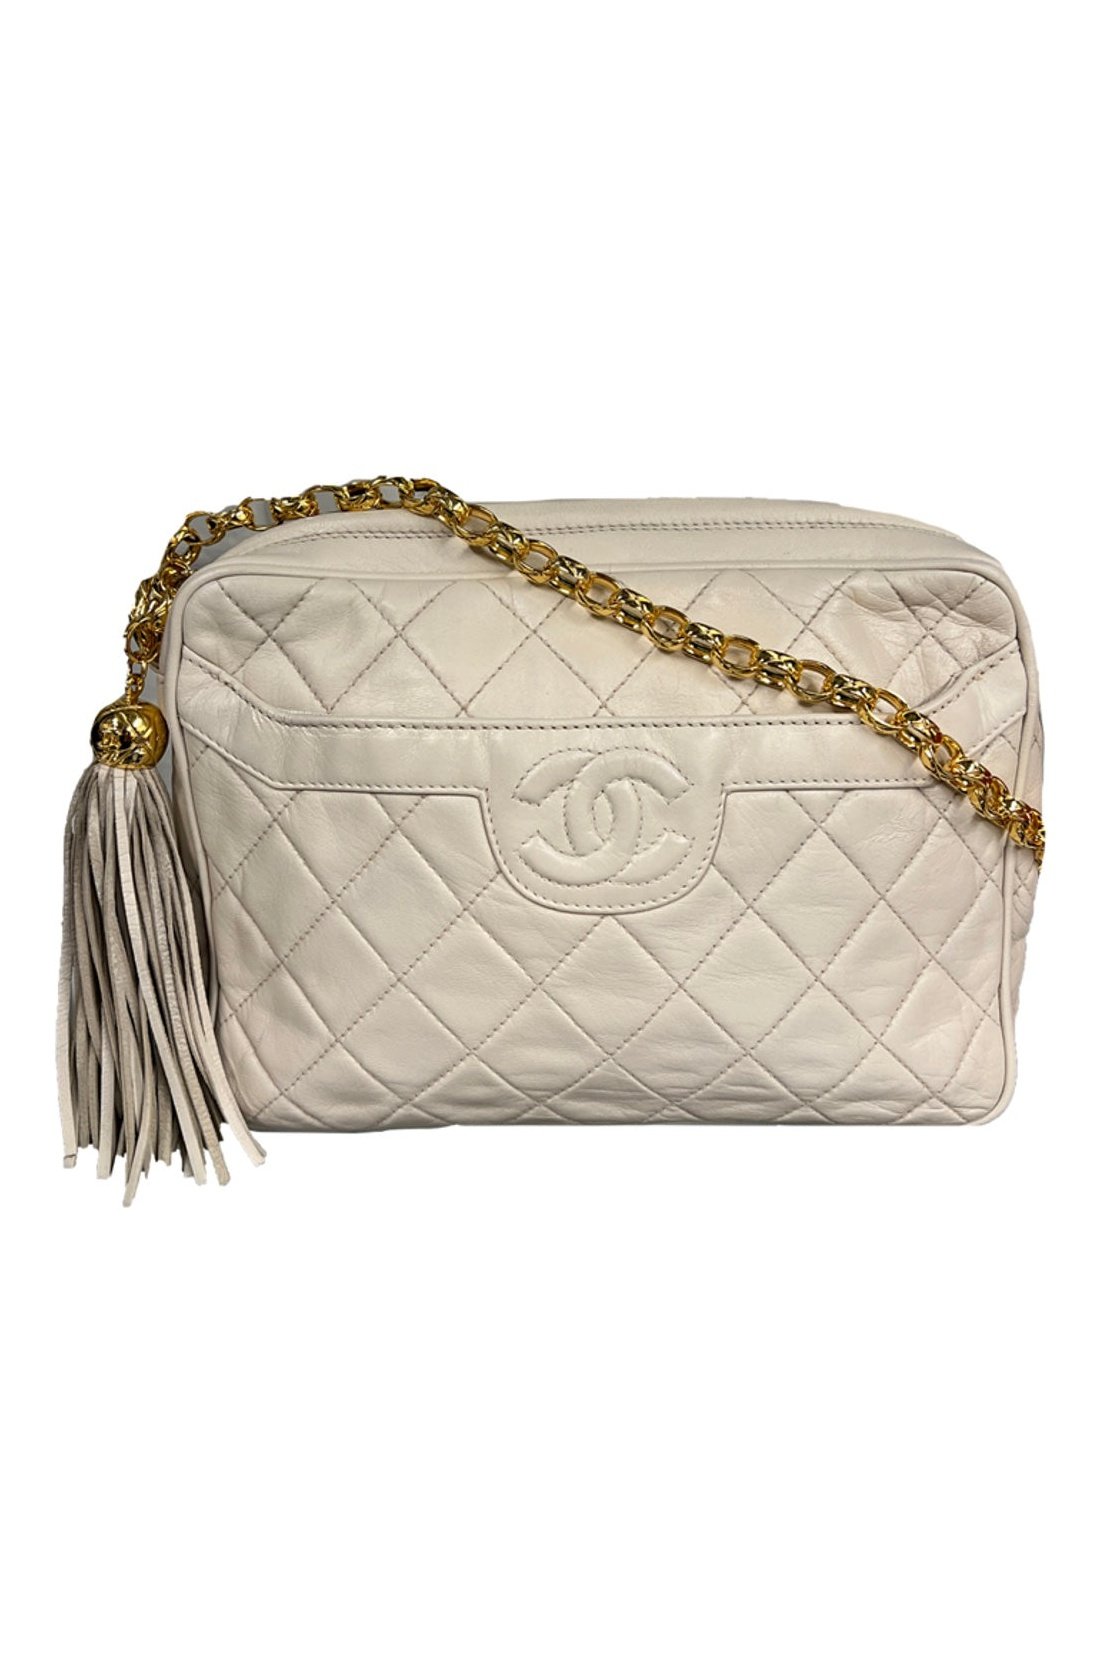 Authentic Chanel Beige Lambskin Classic Camera Bag – Raleigh